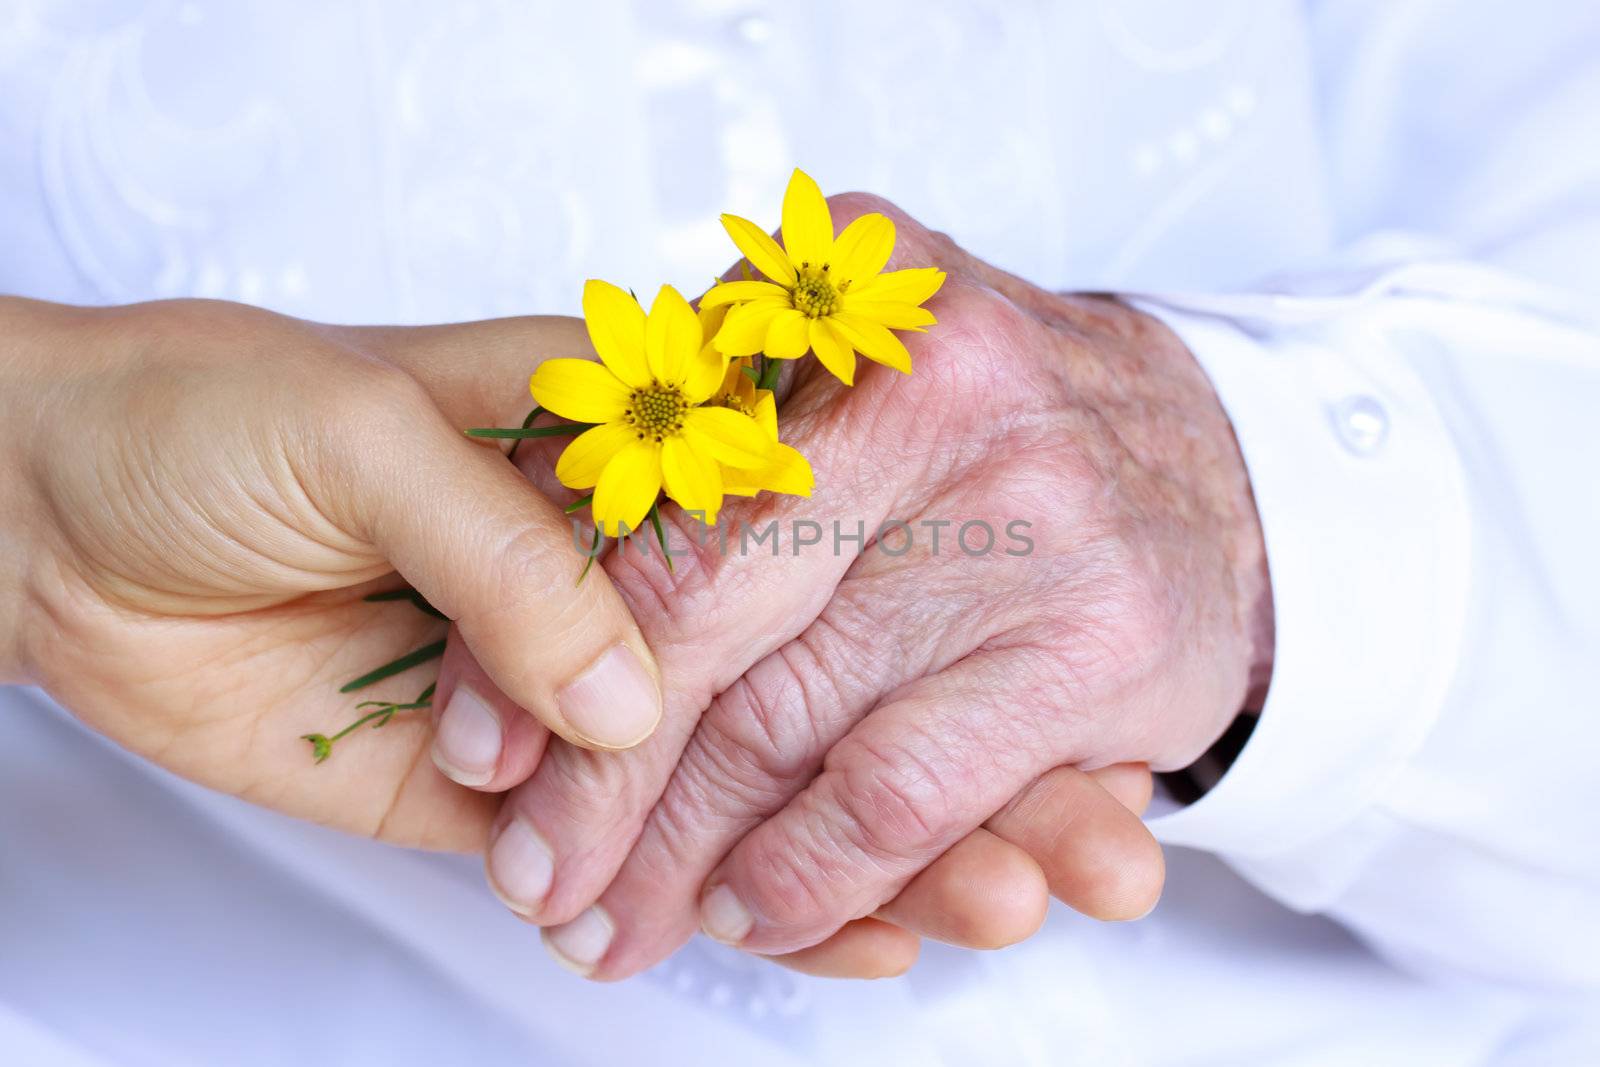 Seninor Lady and Young Woman Holding Hands - Giving Flowers (Friendship, Care, Service)